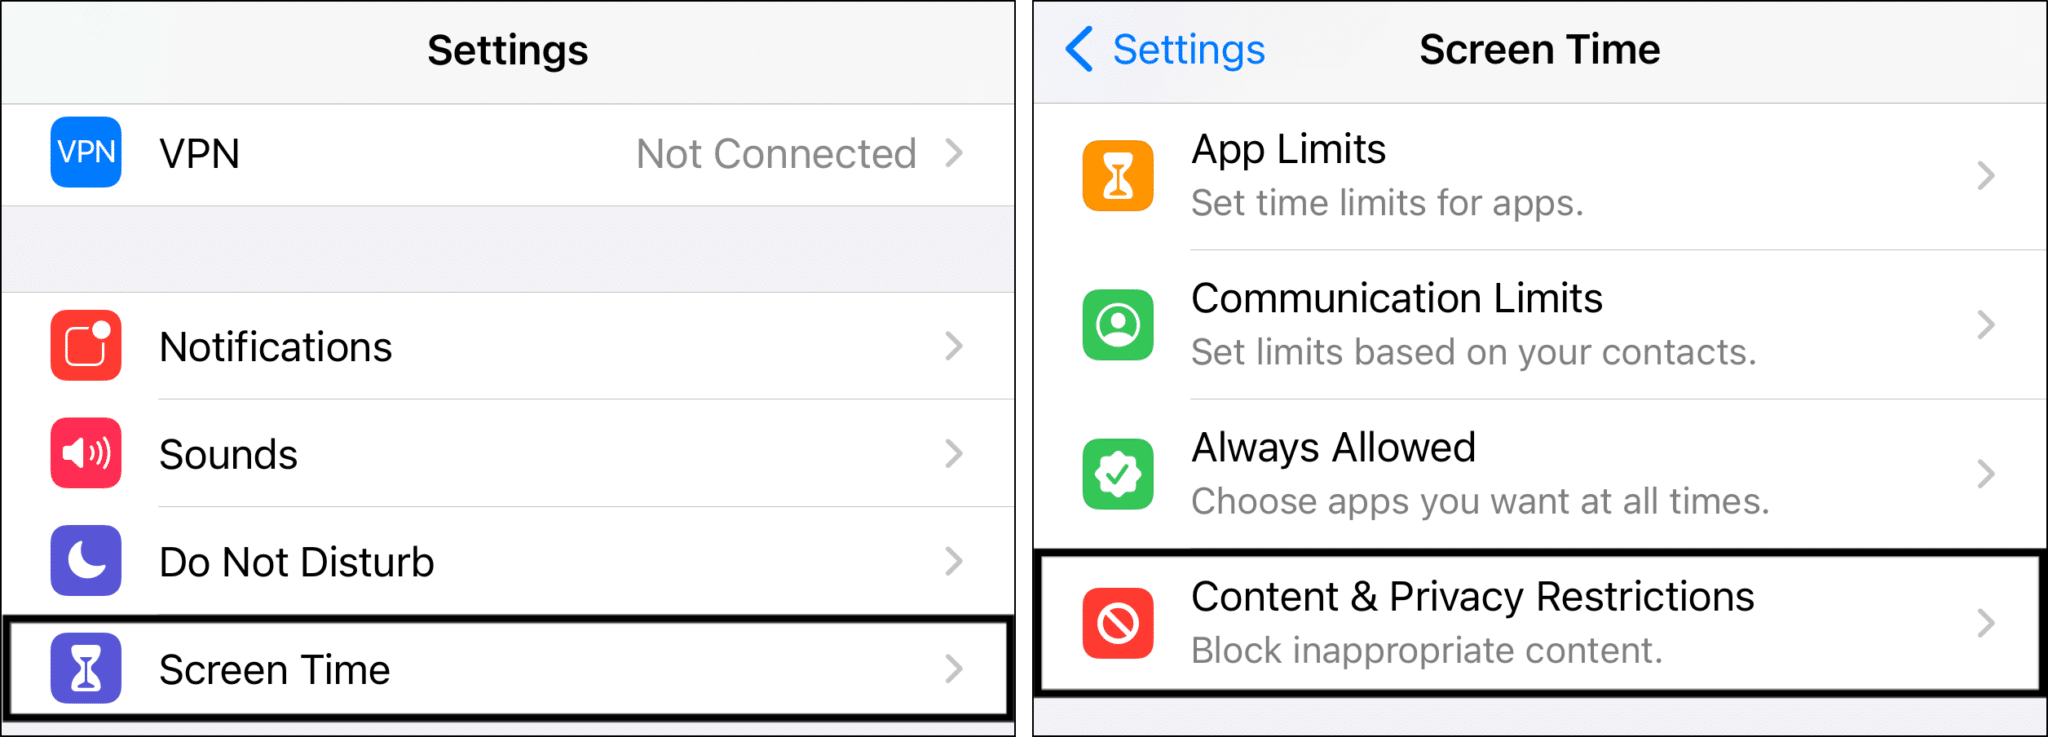 check screen time restriction settings to fix the "Unable to Connect Apple Carplay" error